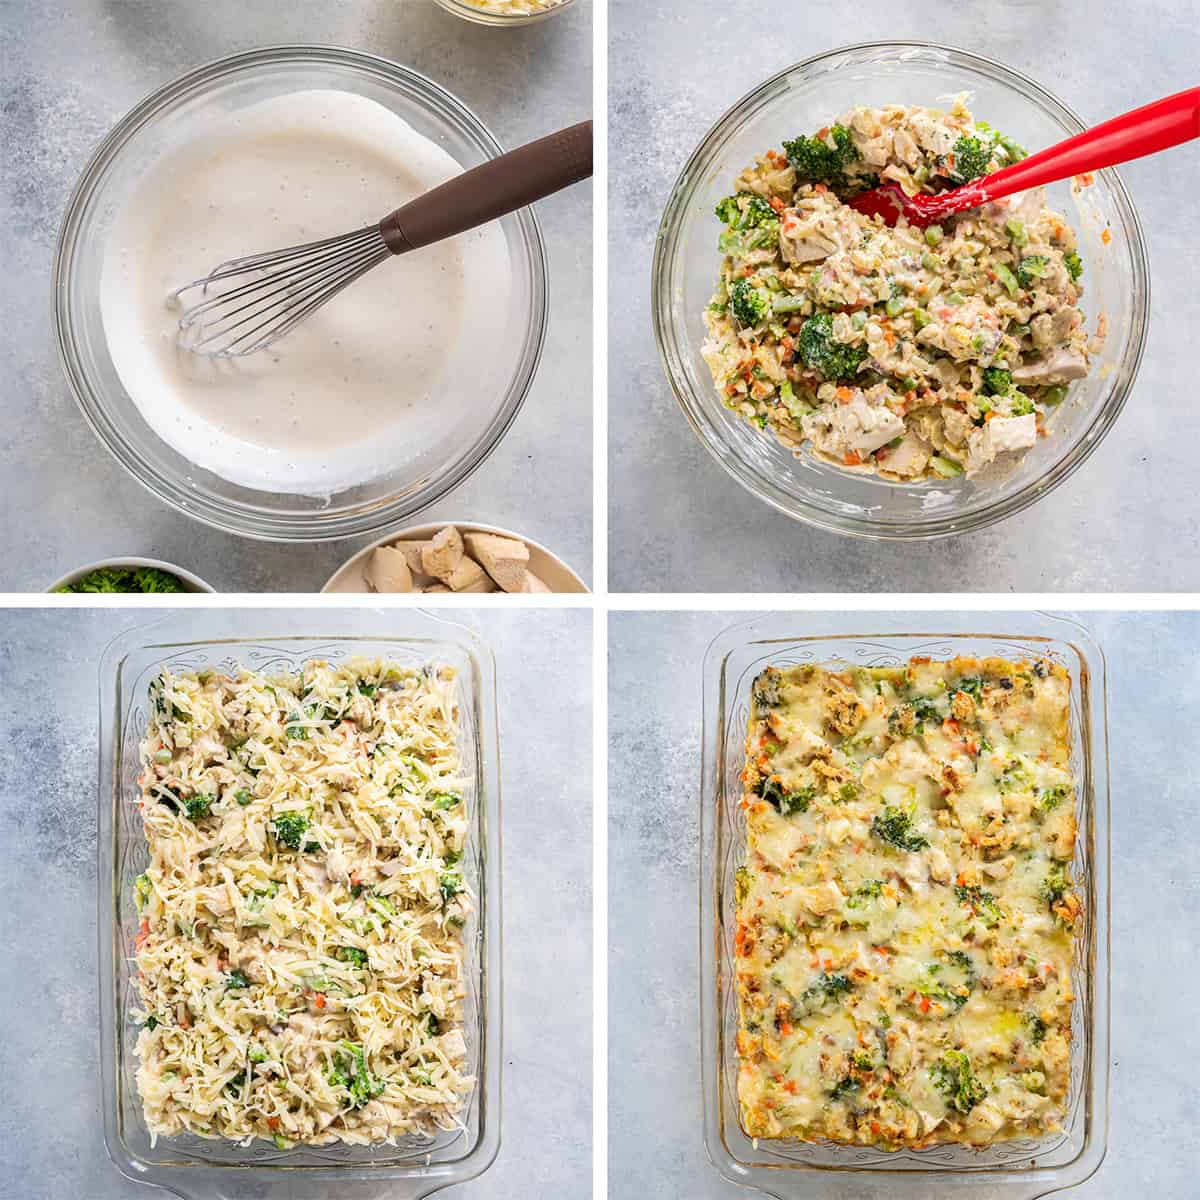 Four images of a cream of mushroom soup mixture combined with stuffing mix, cheese, broccoli and chicken in a bowl and in a baking dish.